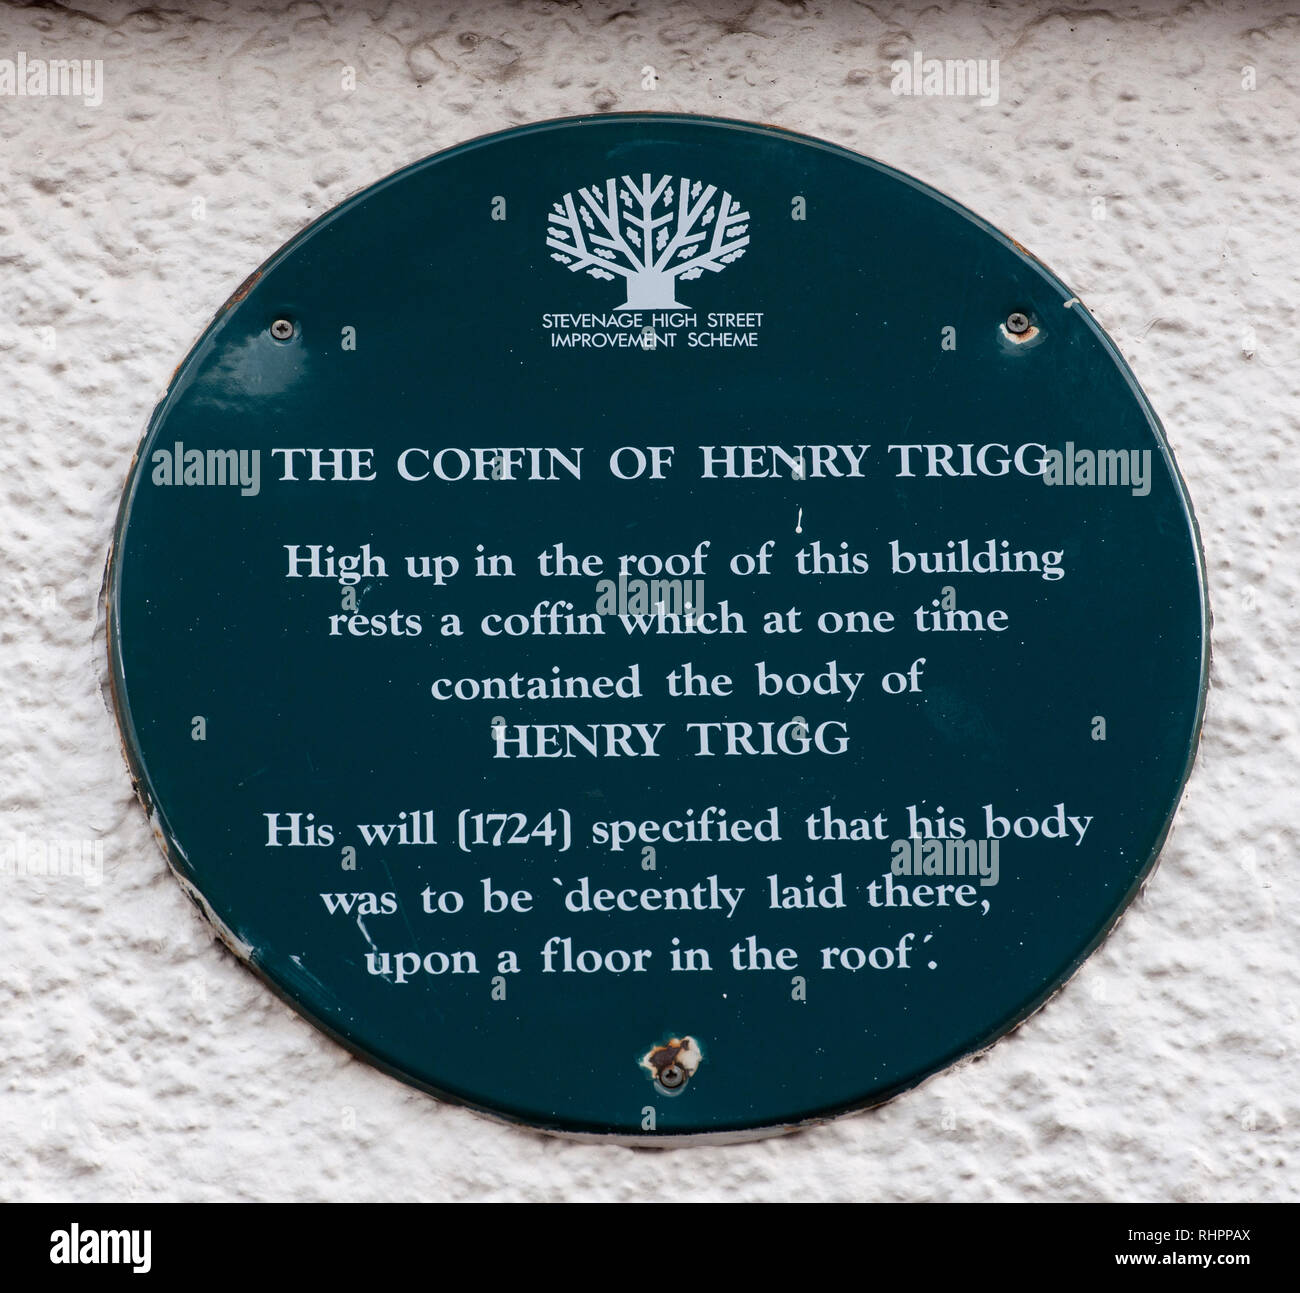 Heritage plaque on the site where the coffin of Henry Trigg was placed, Stevenage, Hertfordshire, England, UK. Stock Photo